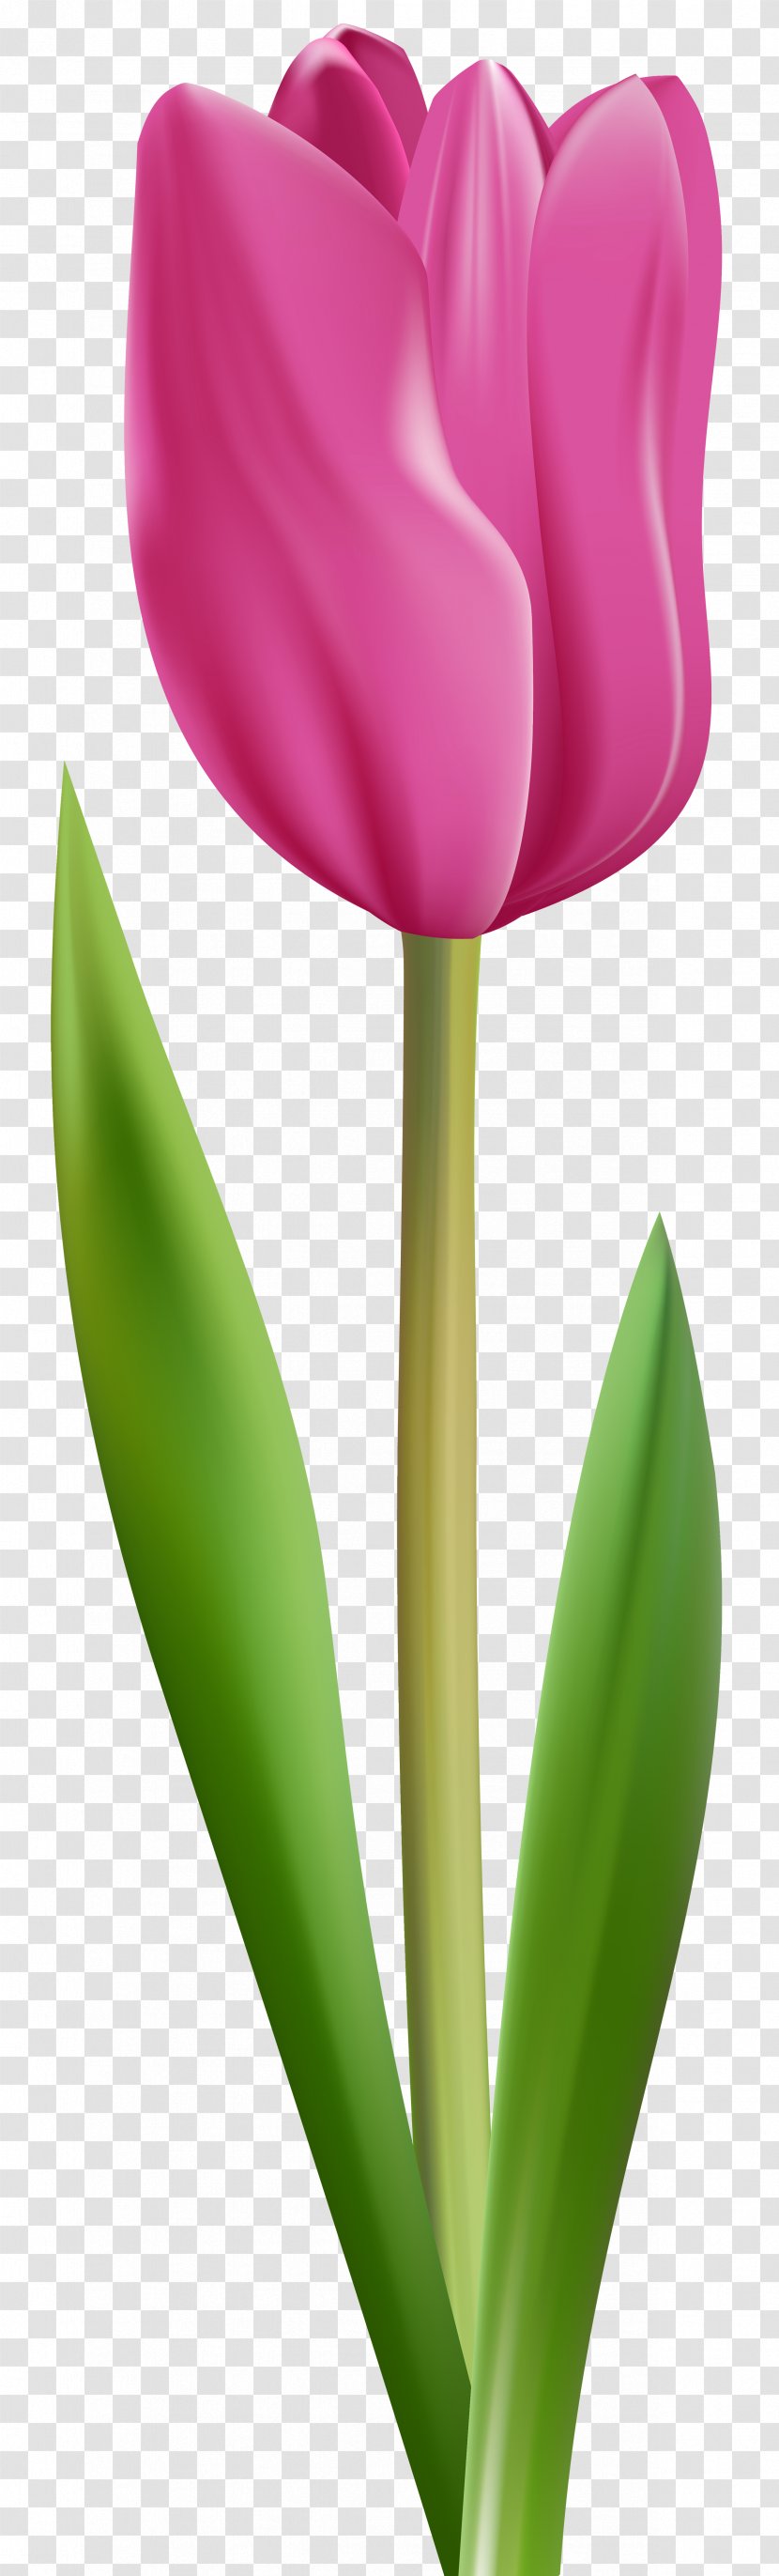 Flower Bouquet Lily Suzani Petal - Lady Tulip - Mothers Day Tulips Transparent PNG